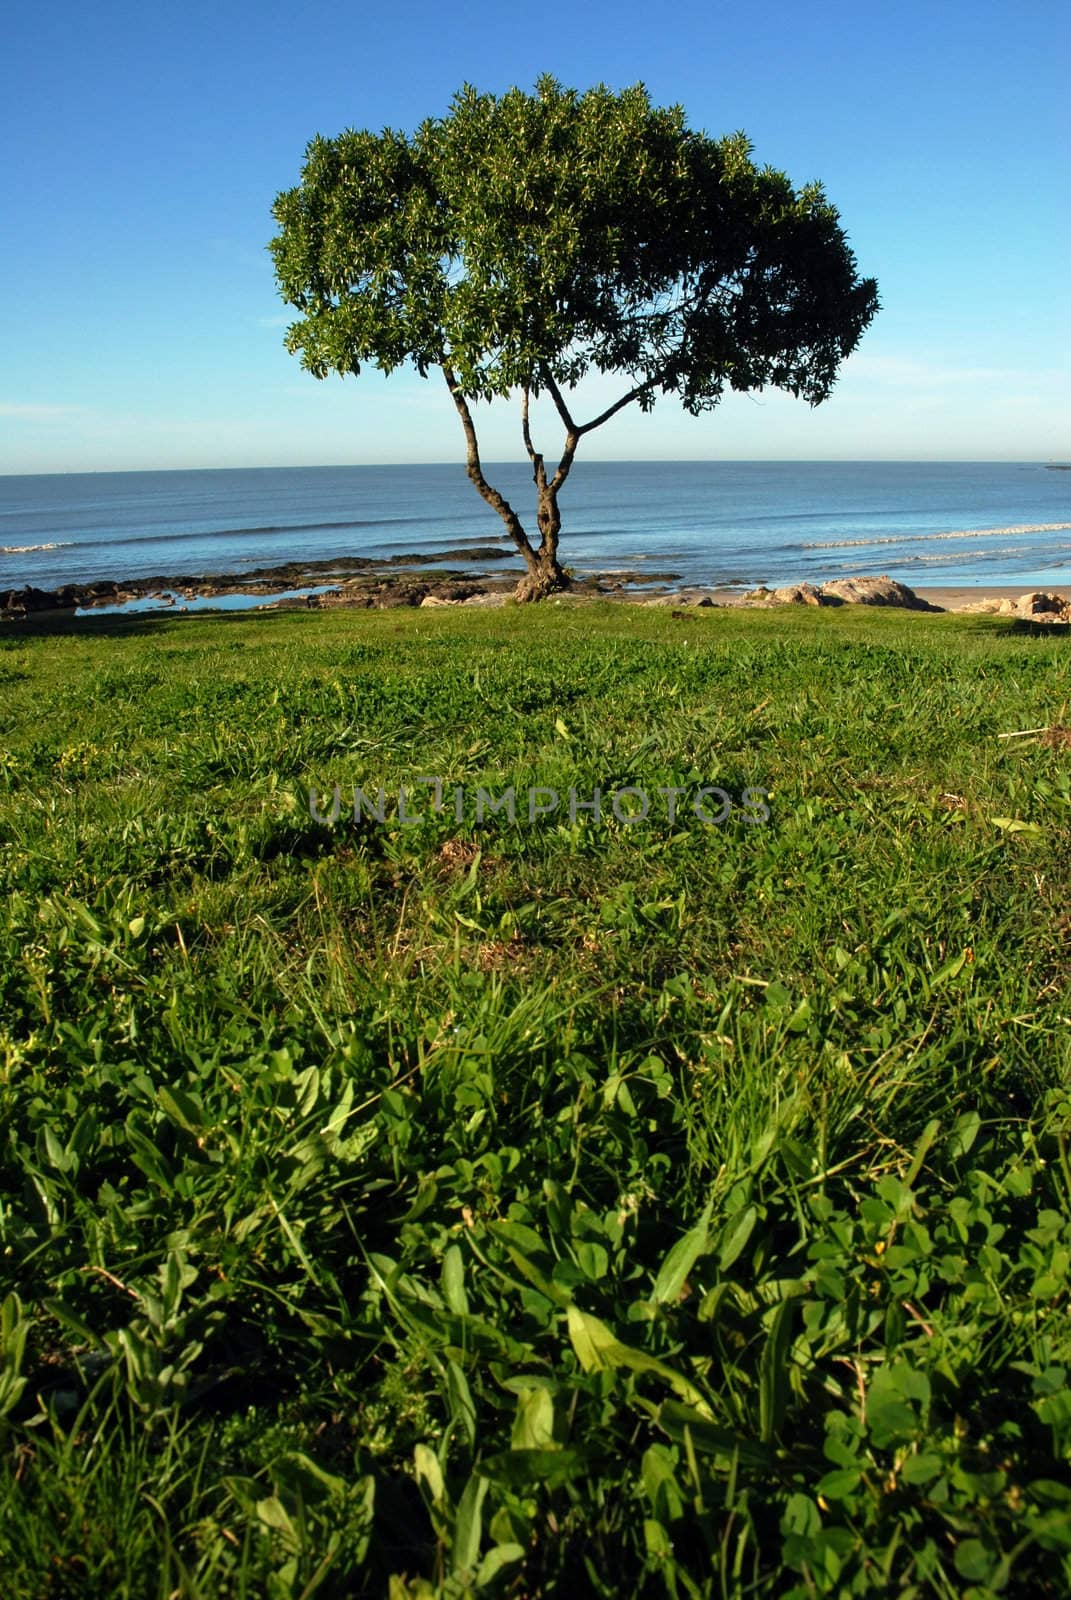 Single tree, green grass and the sea by cienpies